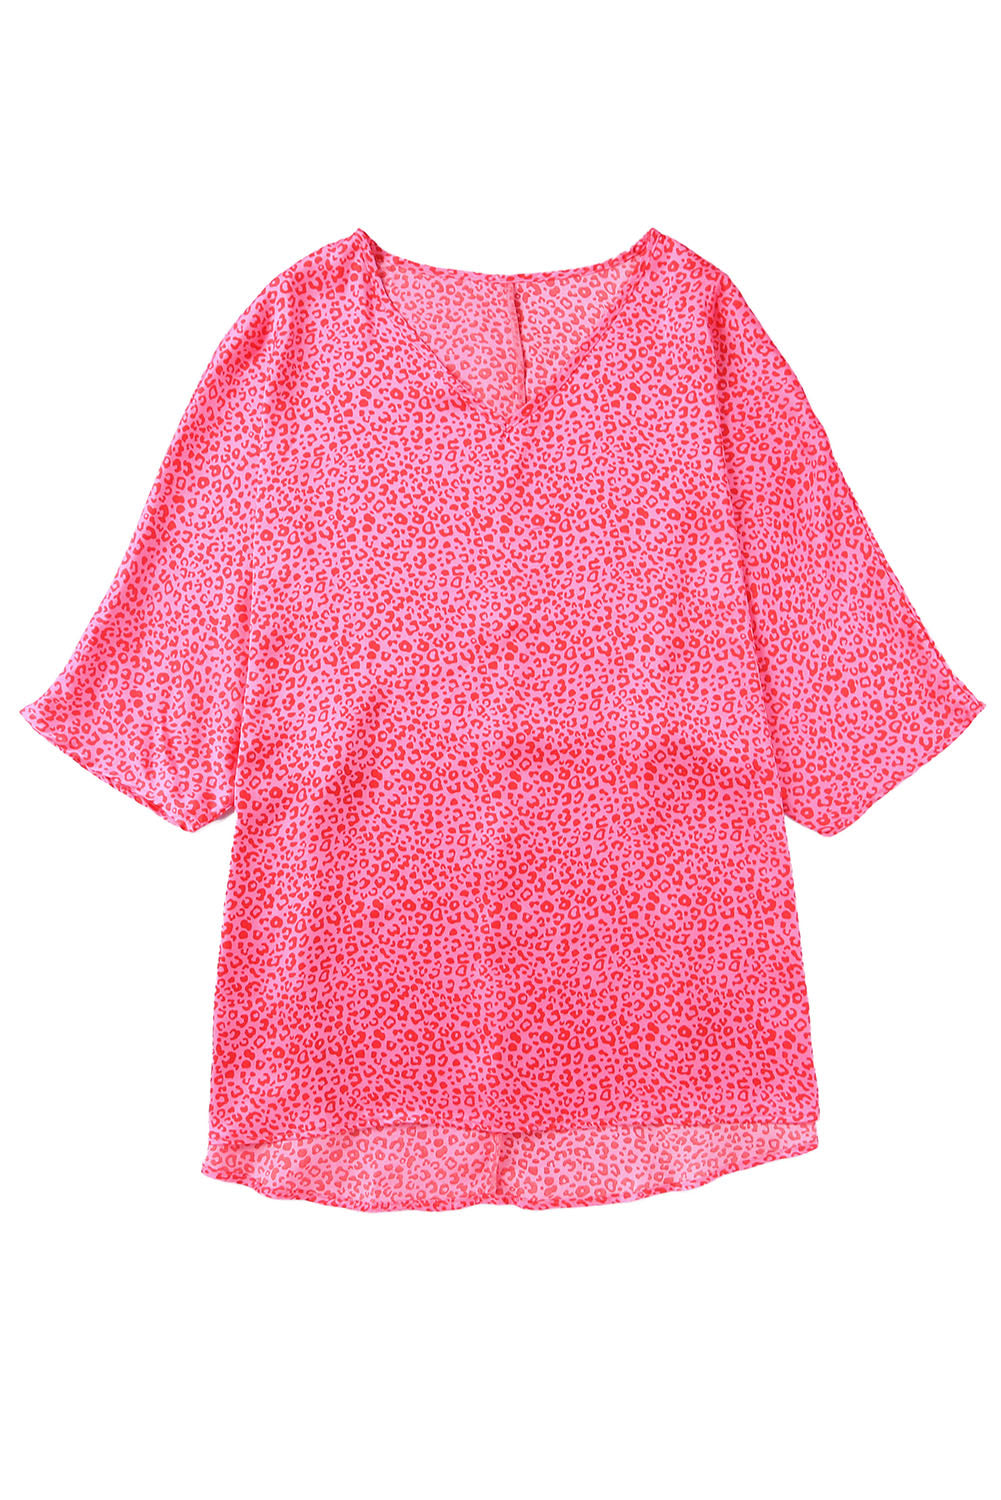 Rosy Leopard Print Oversized Casual Half Sleeve V Neck Top